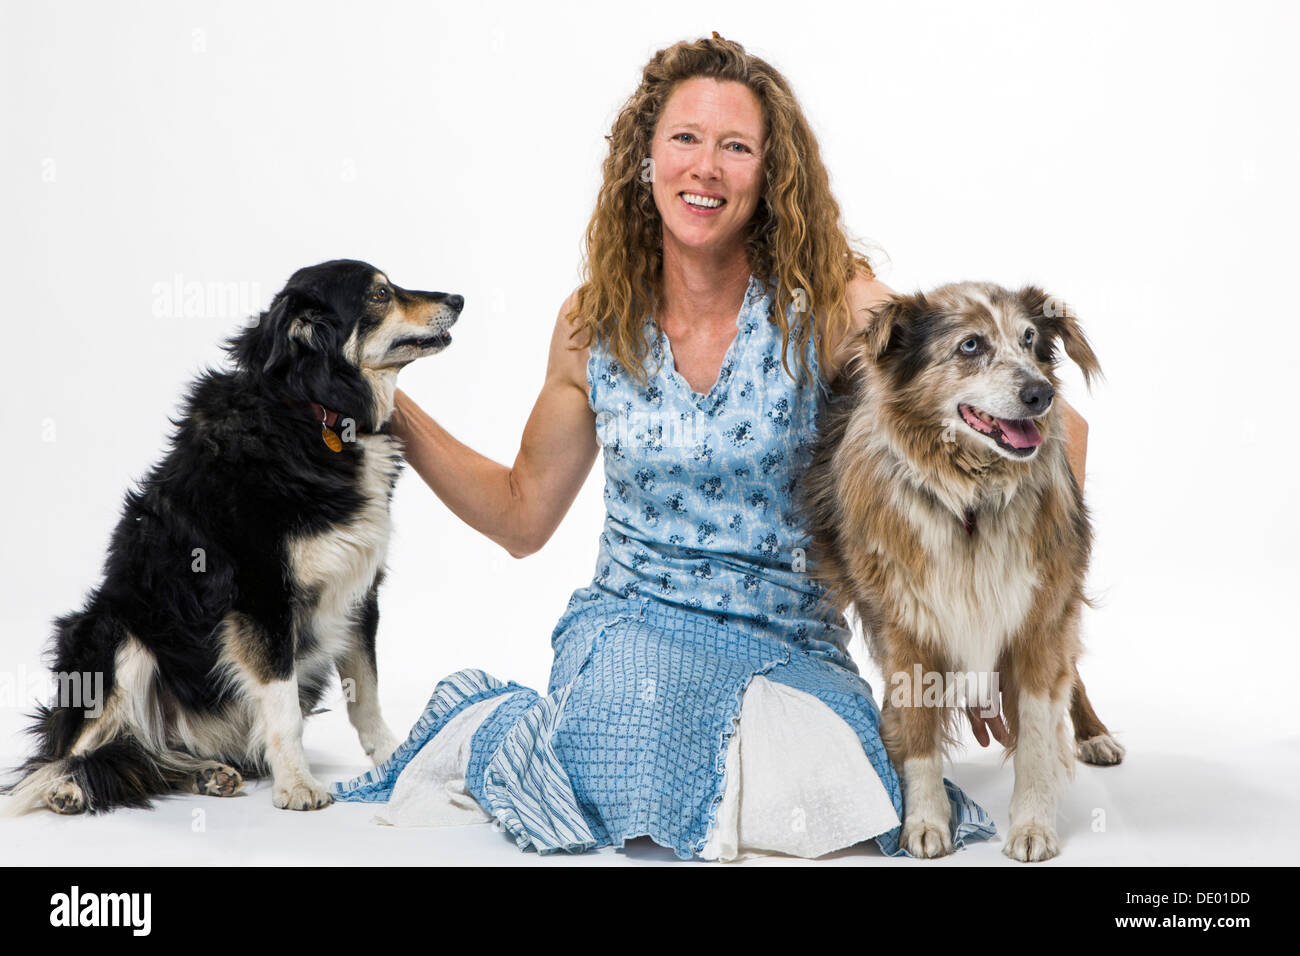 Studio photograph of attractive woman with two pet dogs, a Border Collie mix and Australian Shepherd mix Stock Photo